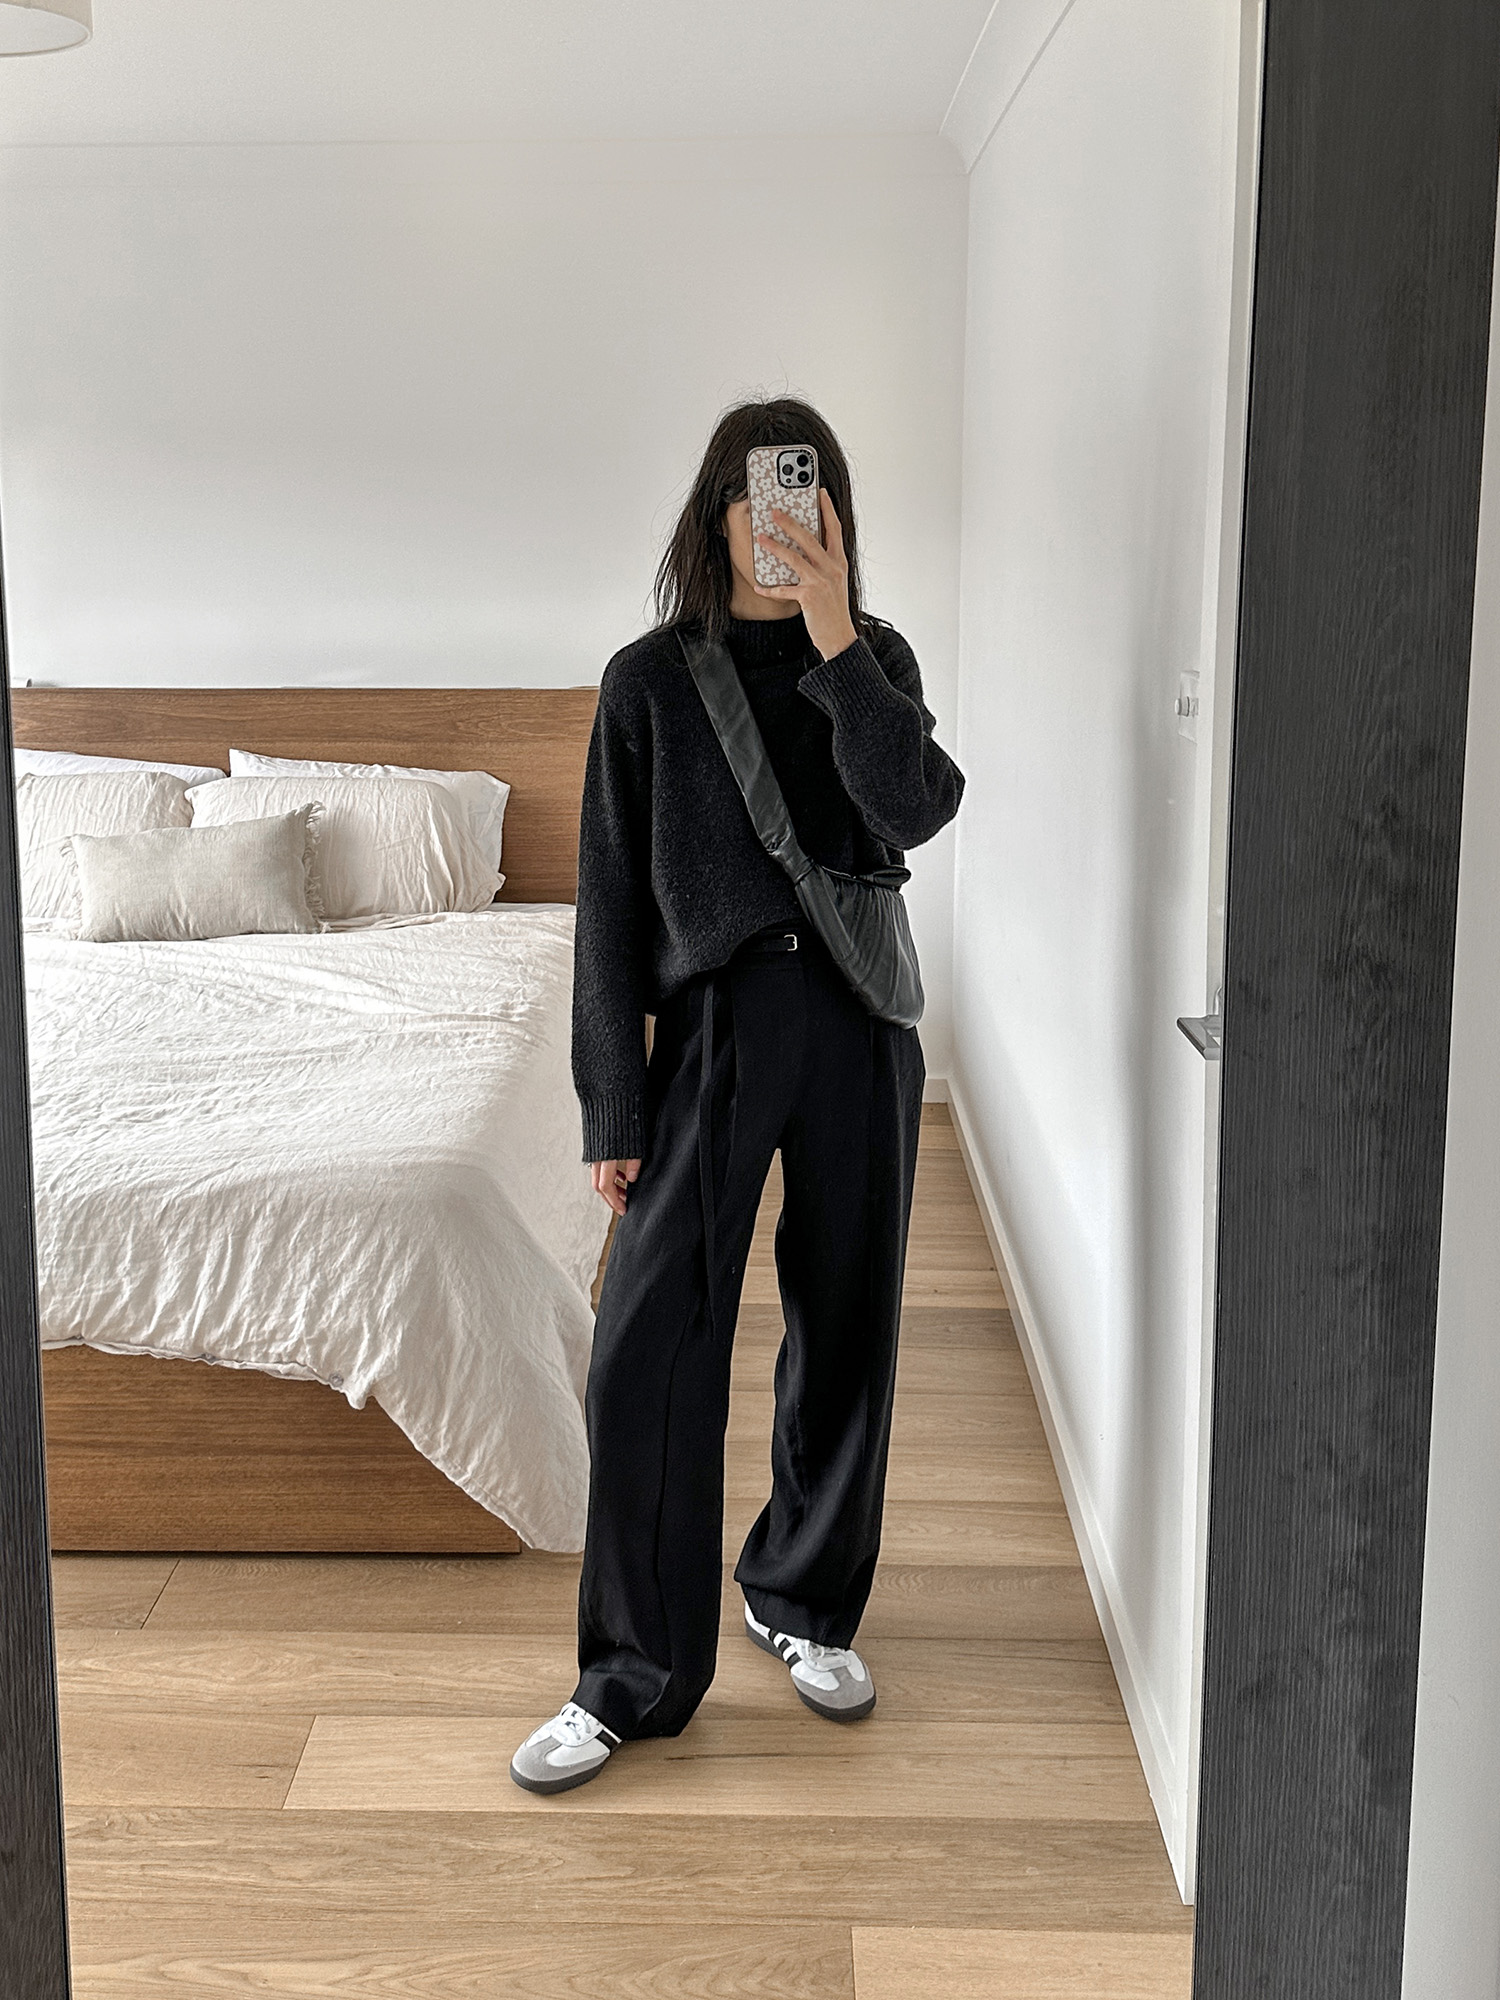 Outfits - Mademoiselle | A Minimal Style Fashion Blog